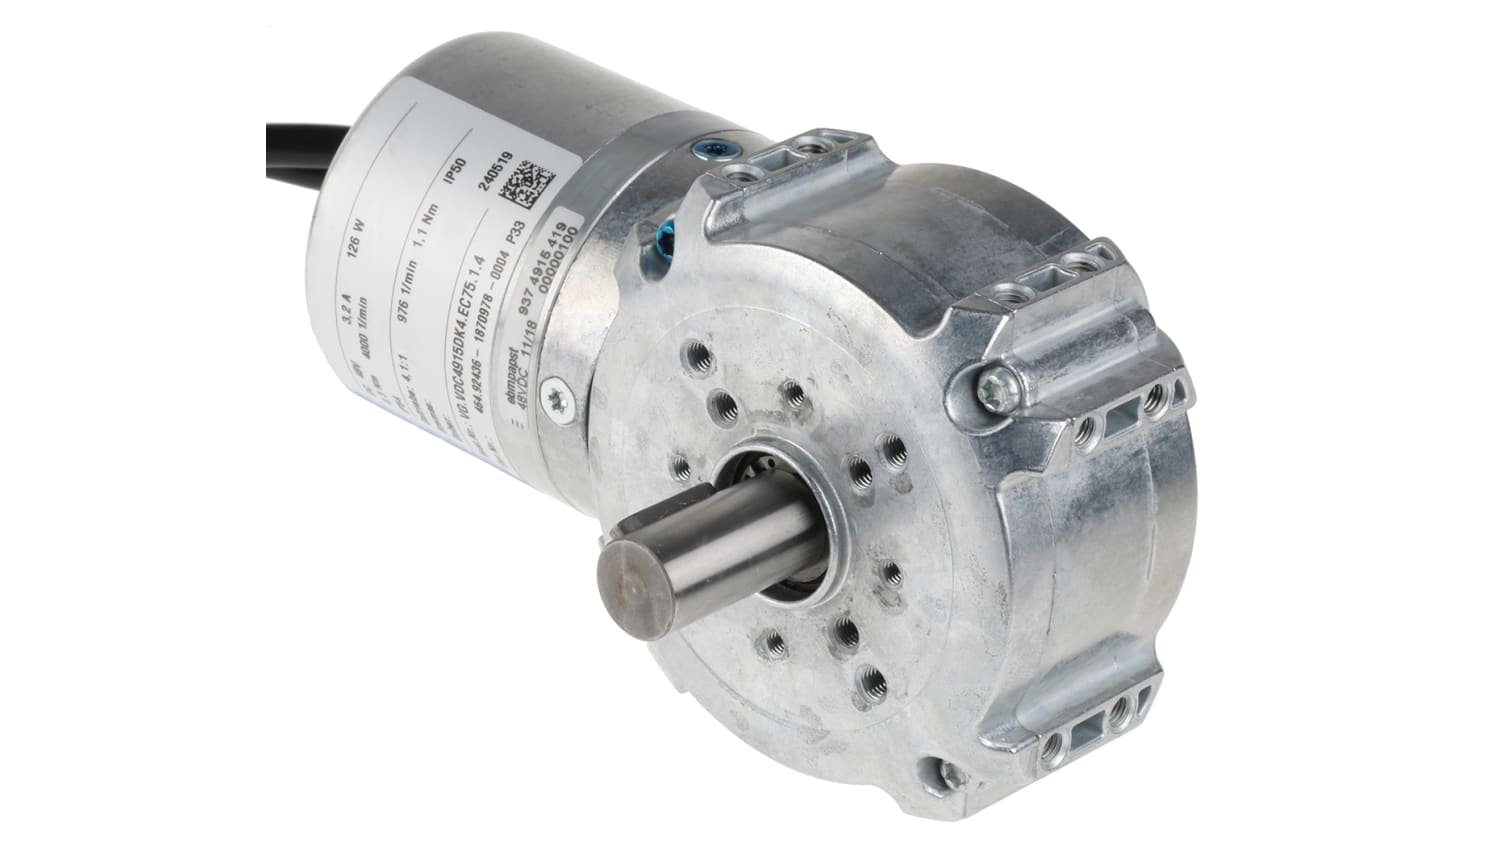 Vg Vdc4915dk4 Ec75 1 4 Ebm Papst Brushless Geared Dc Geared Motor 110 W 48 V Dc 1 1 Nm 1000 Rpm 15mm Shaft Diameter Rs Components